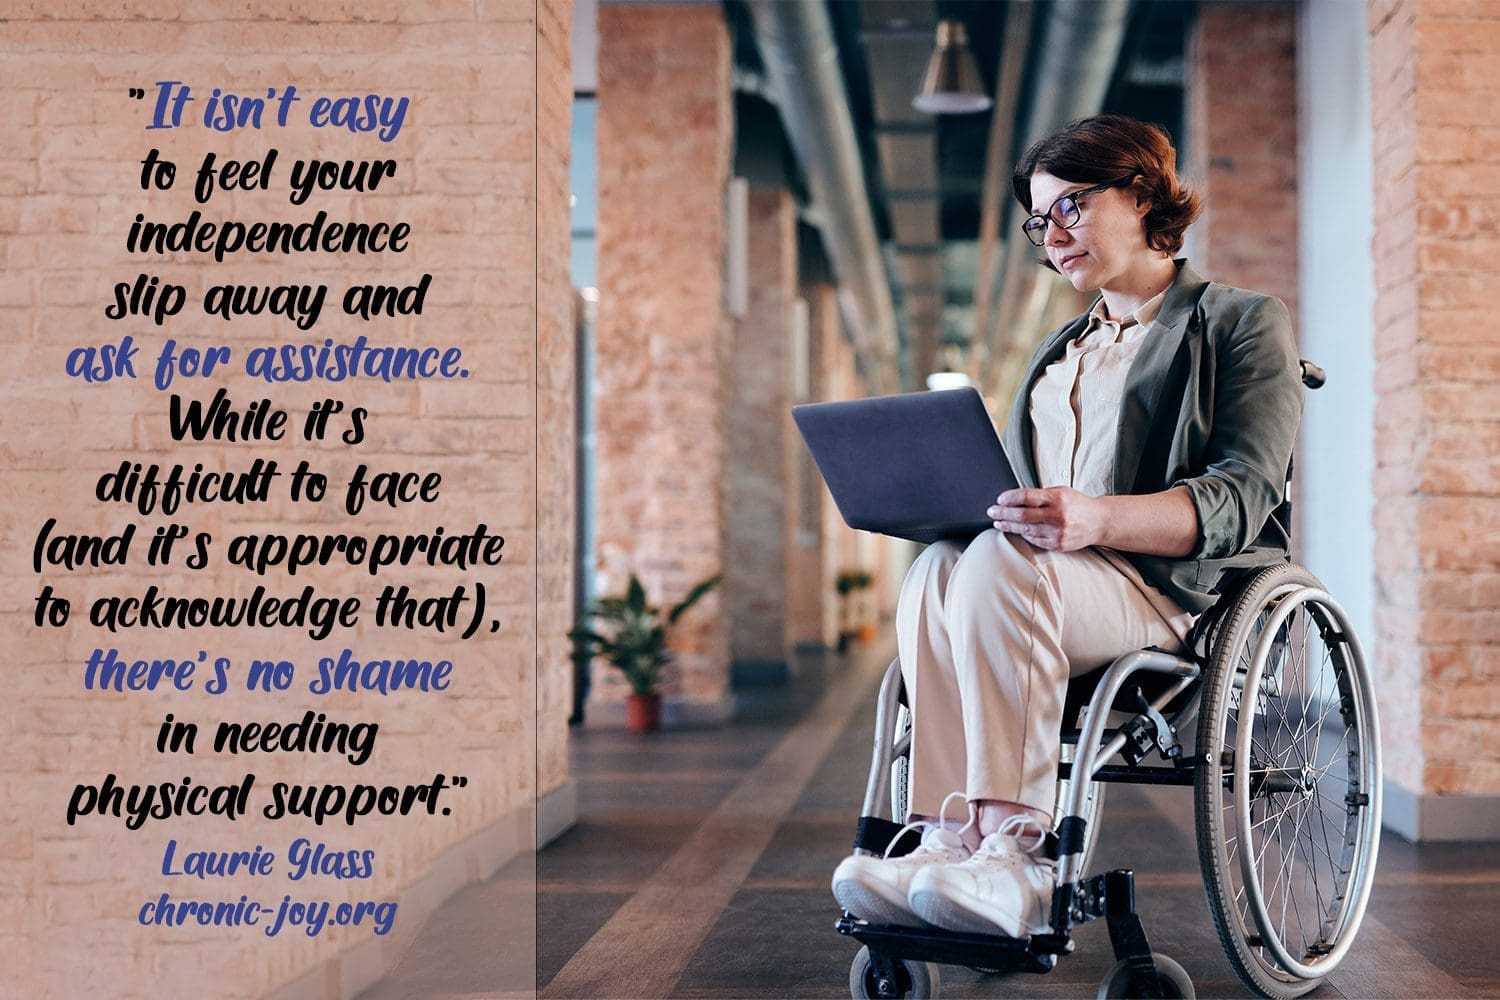 “It isn’t easy to feel your independence slip away and ask for assistance. While it’s difficult to face (and it’s appropriate to acknowledge that), there’s no shame in needing physical support.” Laurie Glass